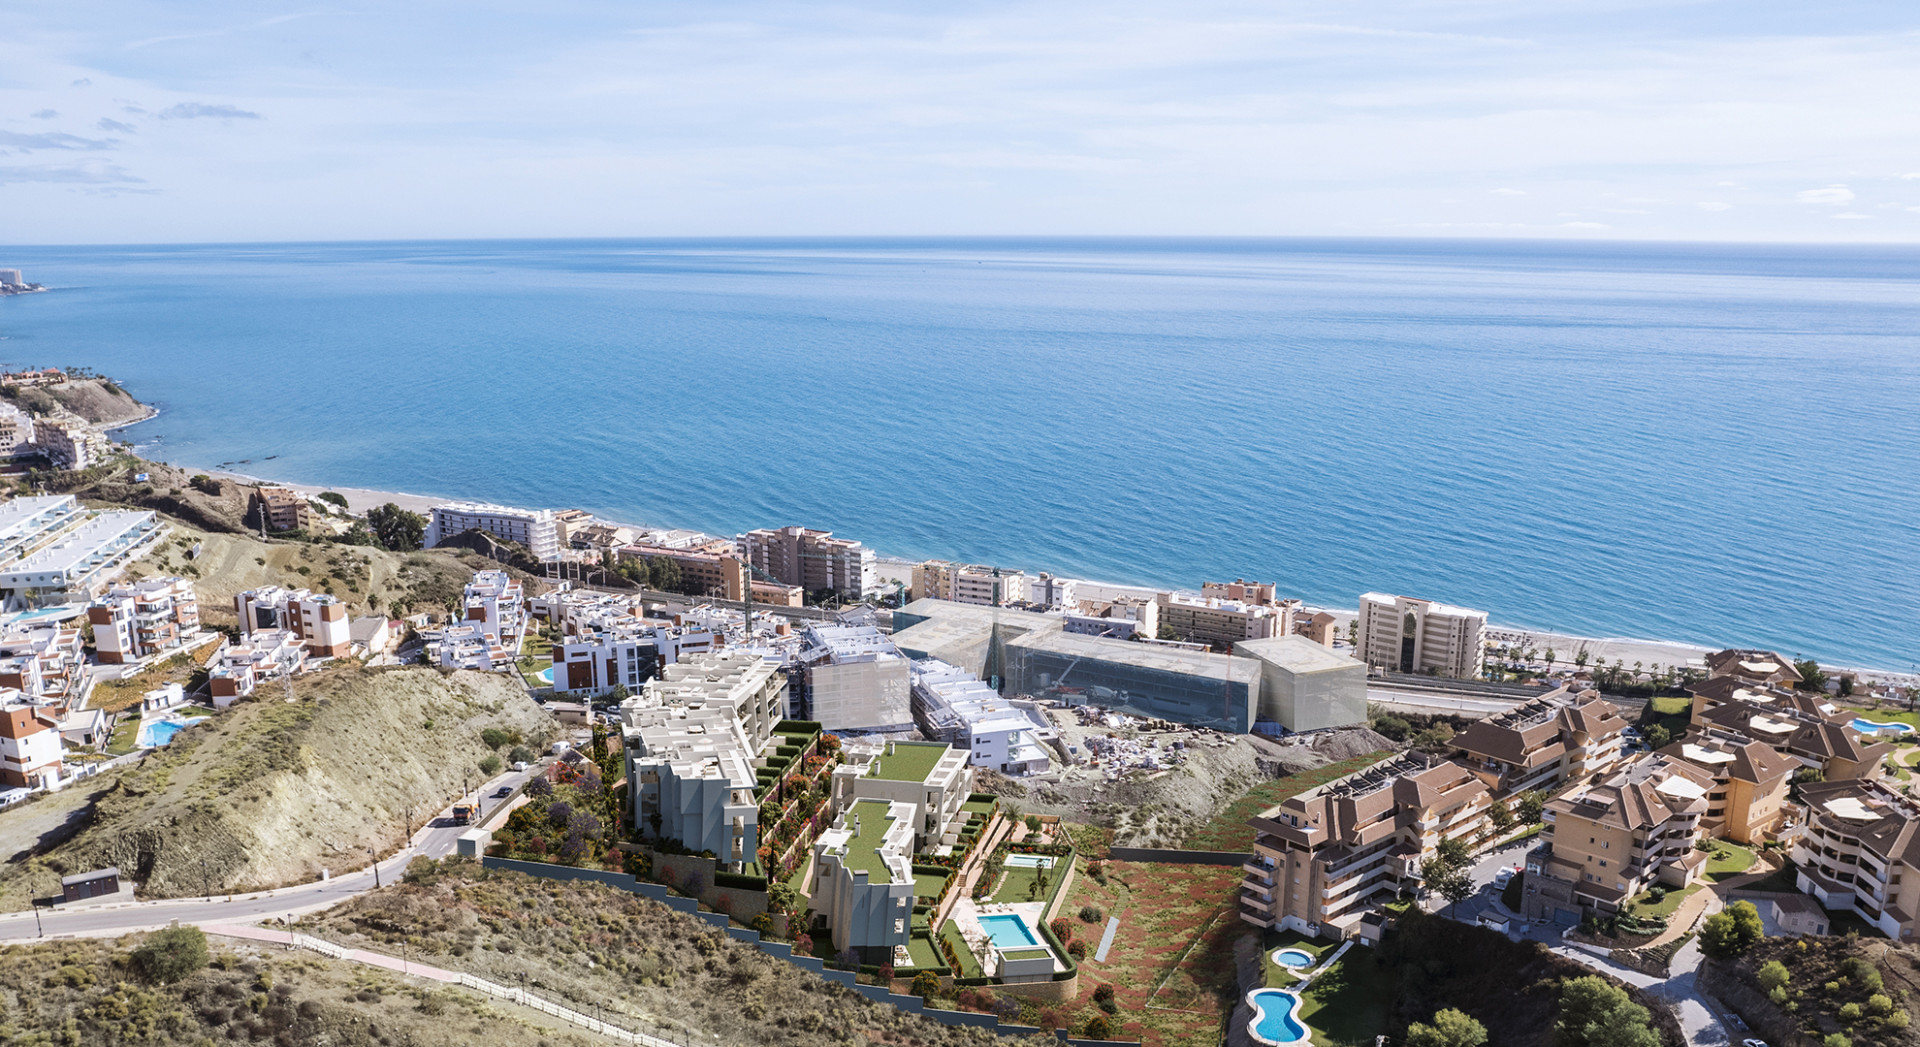 New contemporary off-plan project of apartments for sale in El Higueron - Benalmadena